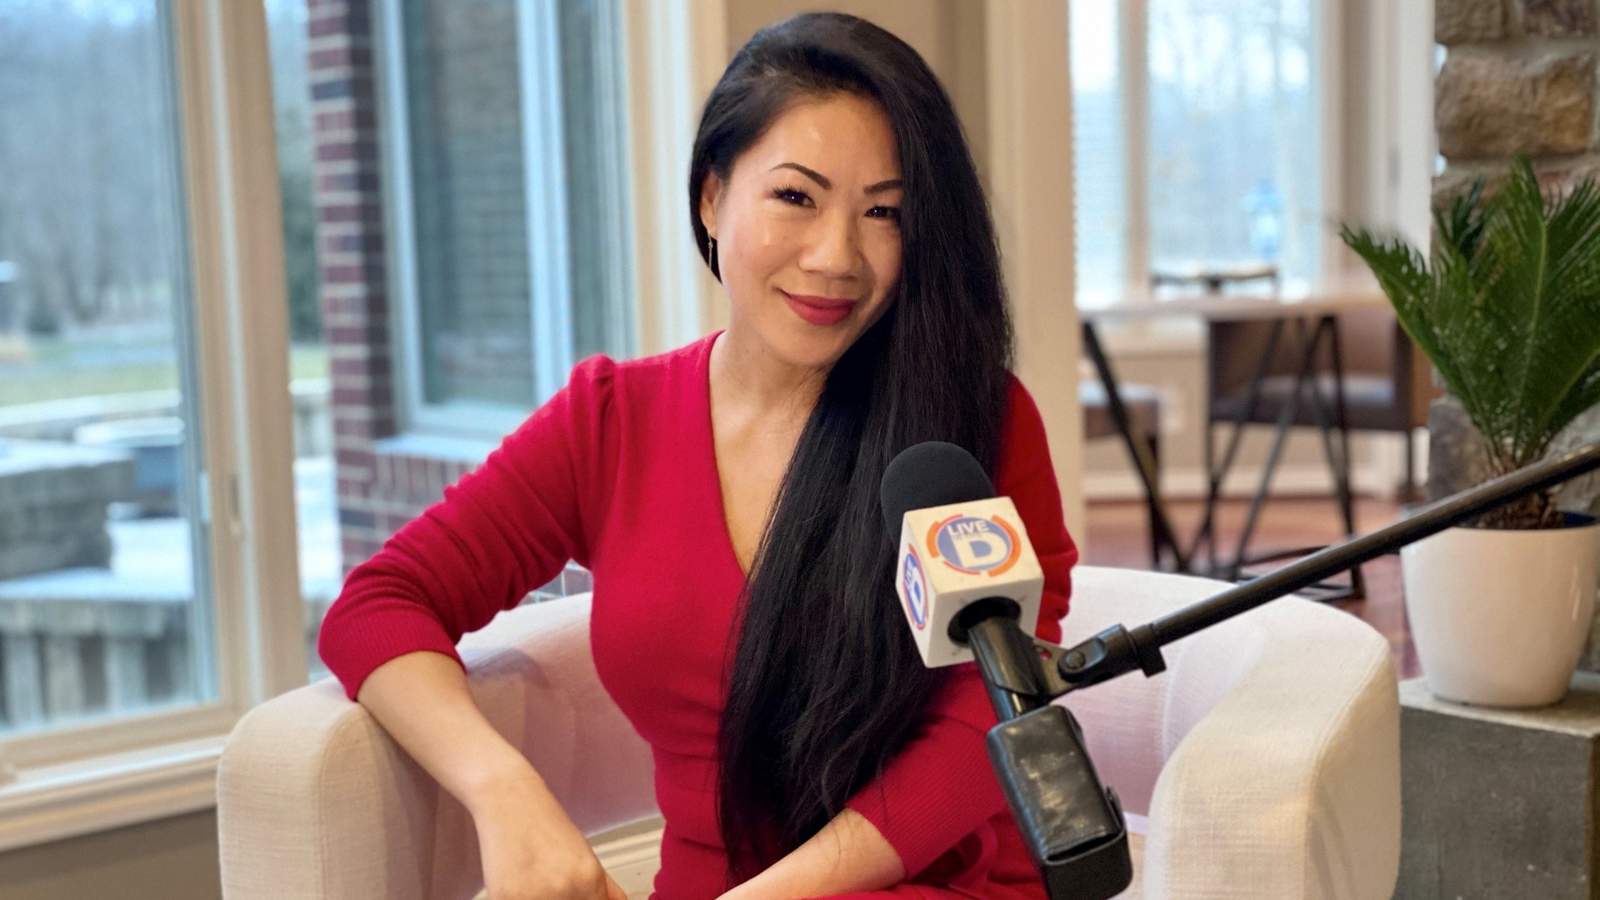 From poverty to influencer: How Grace Liang is inspiring thousands